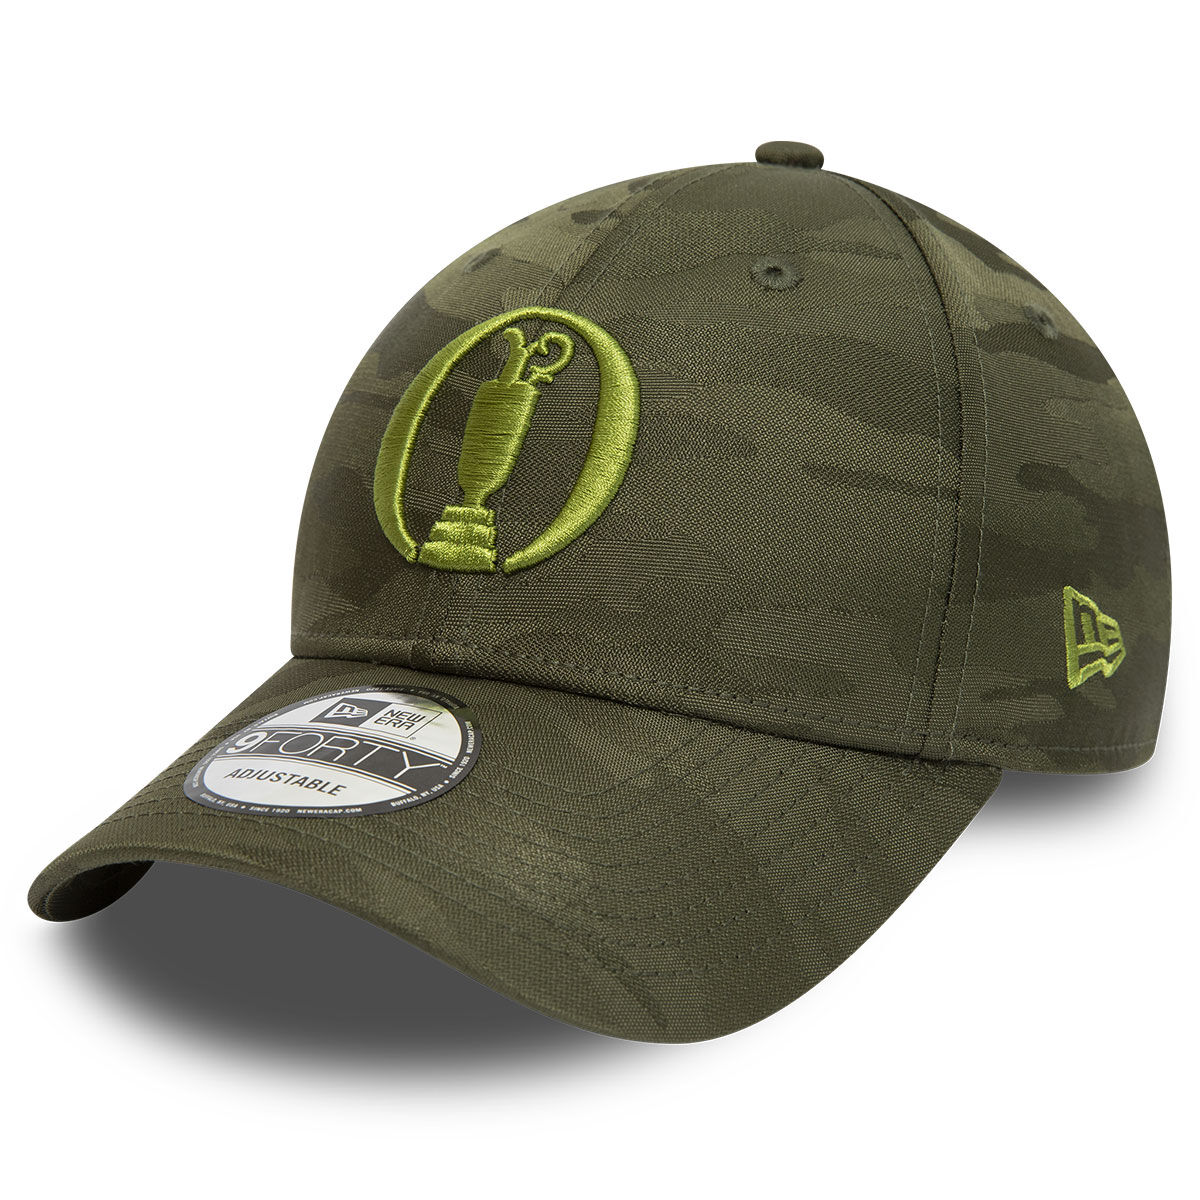 New Era Men’s Tonal Camo 9Forty The Open Golf Cap, Mens, Camoflage, One size | American Golf